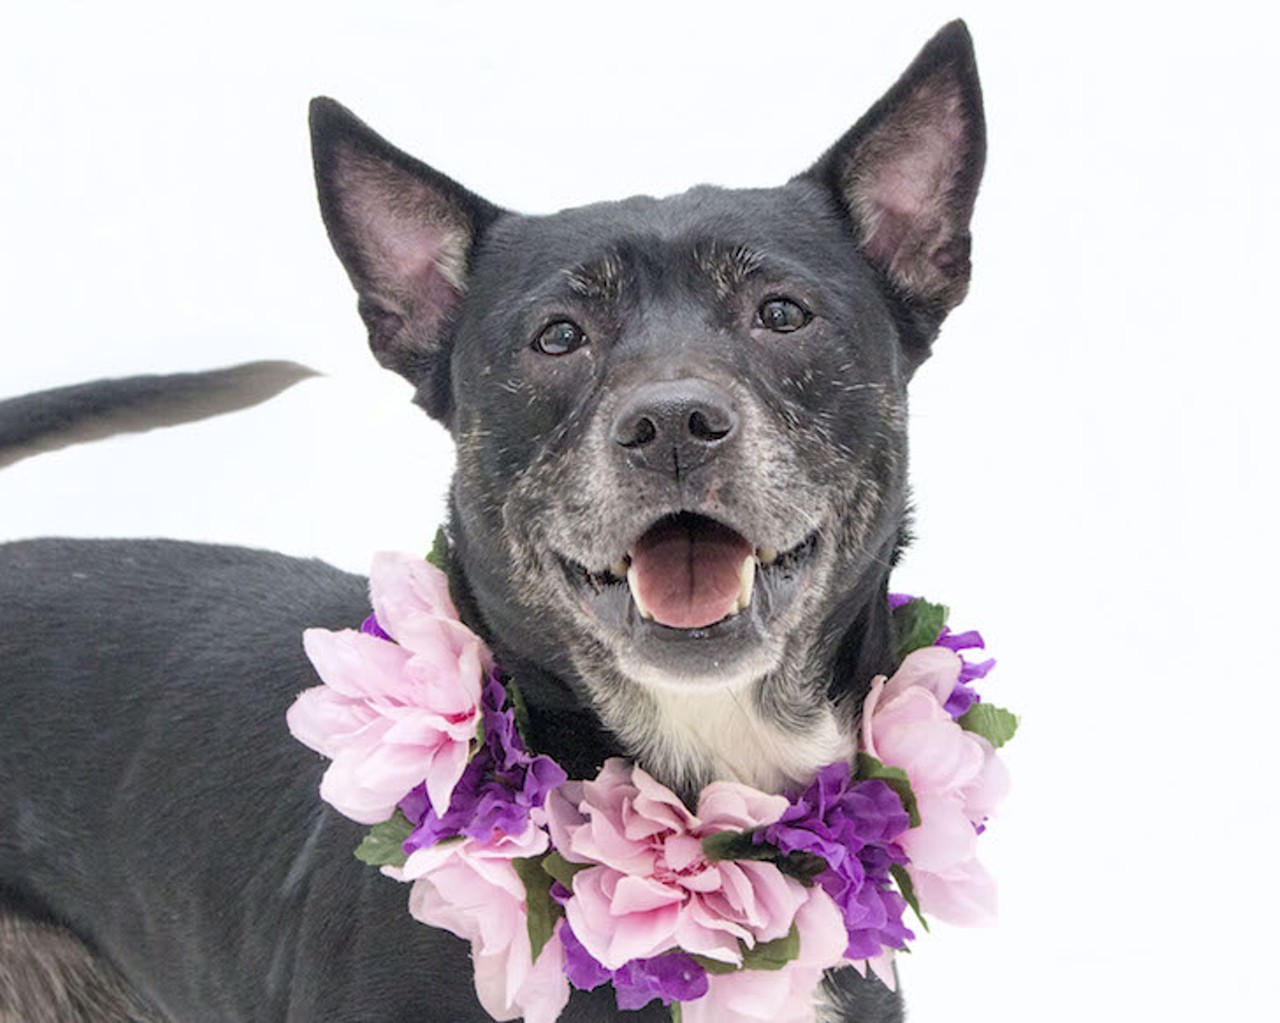 22 adoptable dogs that would love to meet you at Orange County Animal Services